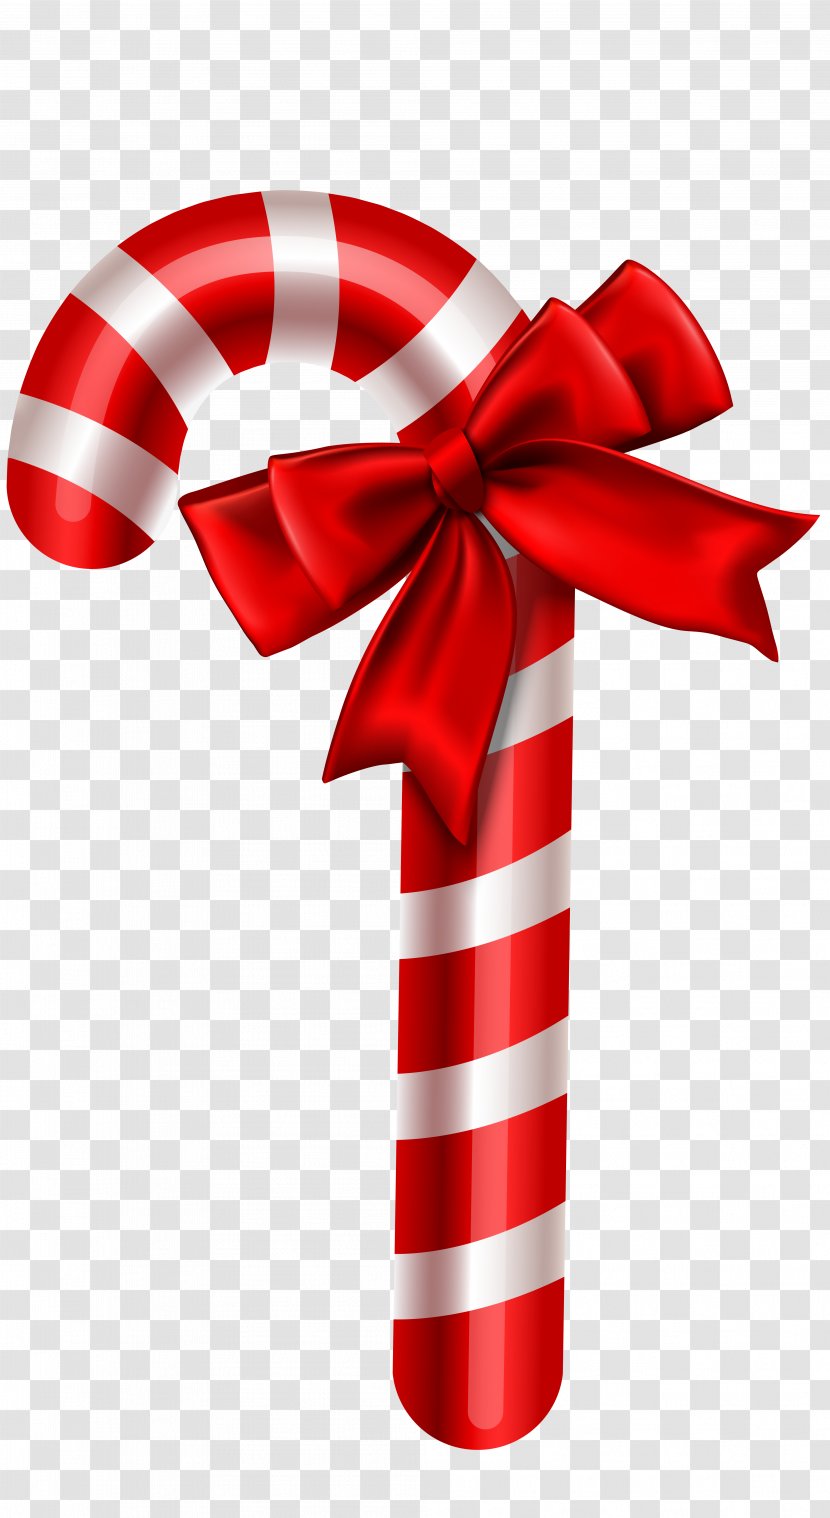 Candy Cane Christmas Ornament Clip Art - Red Transparent PNG